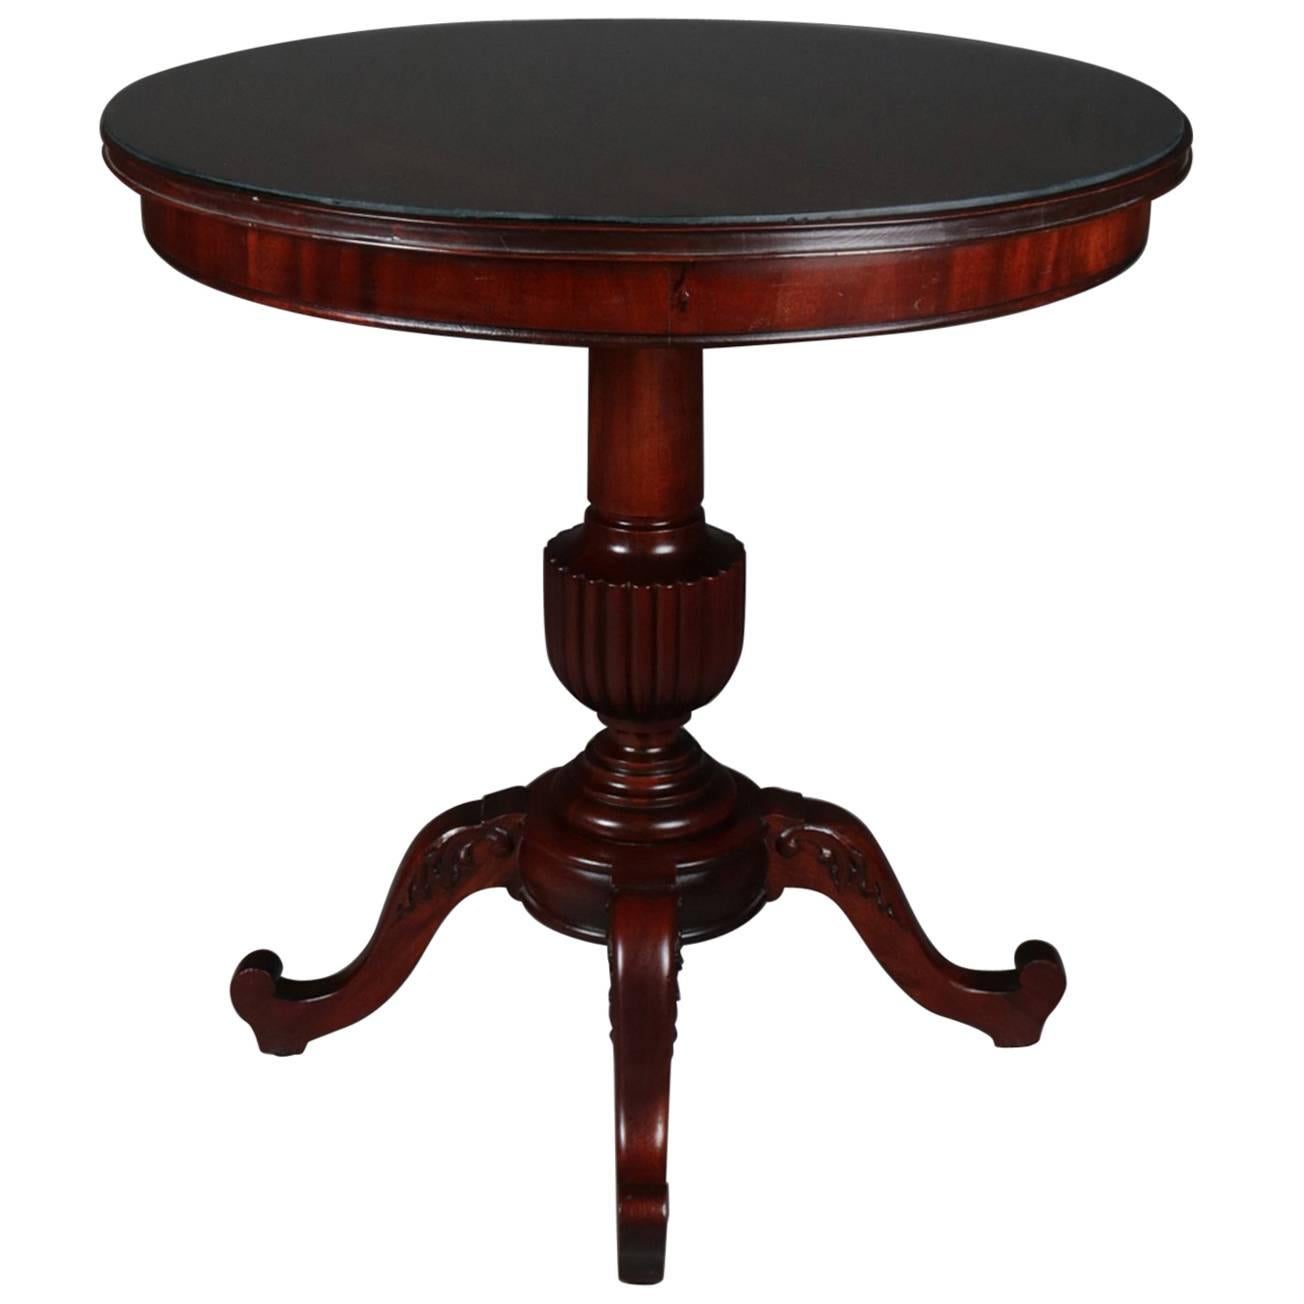 Antique French Style Horner Bros Carved Flame Mahogany Center Table, circa 1900